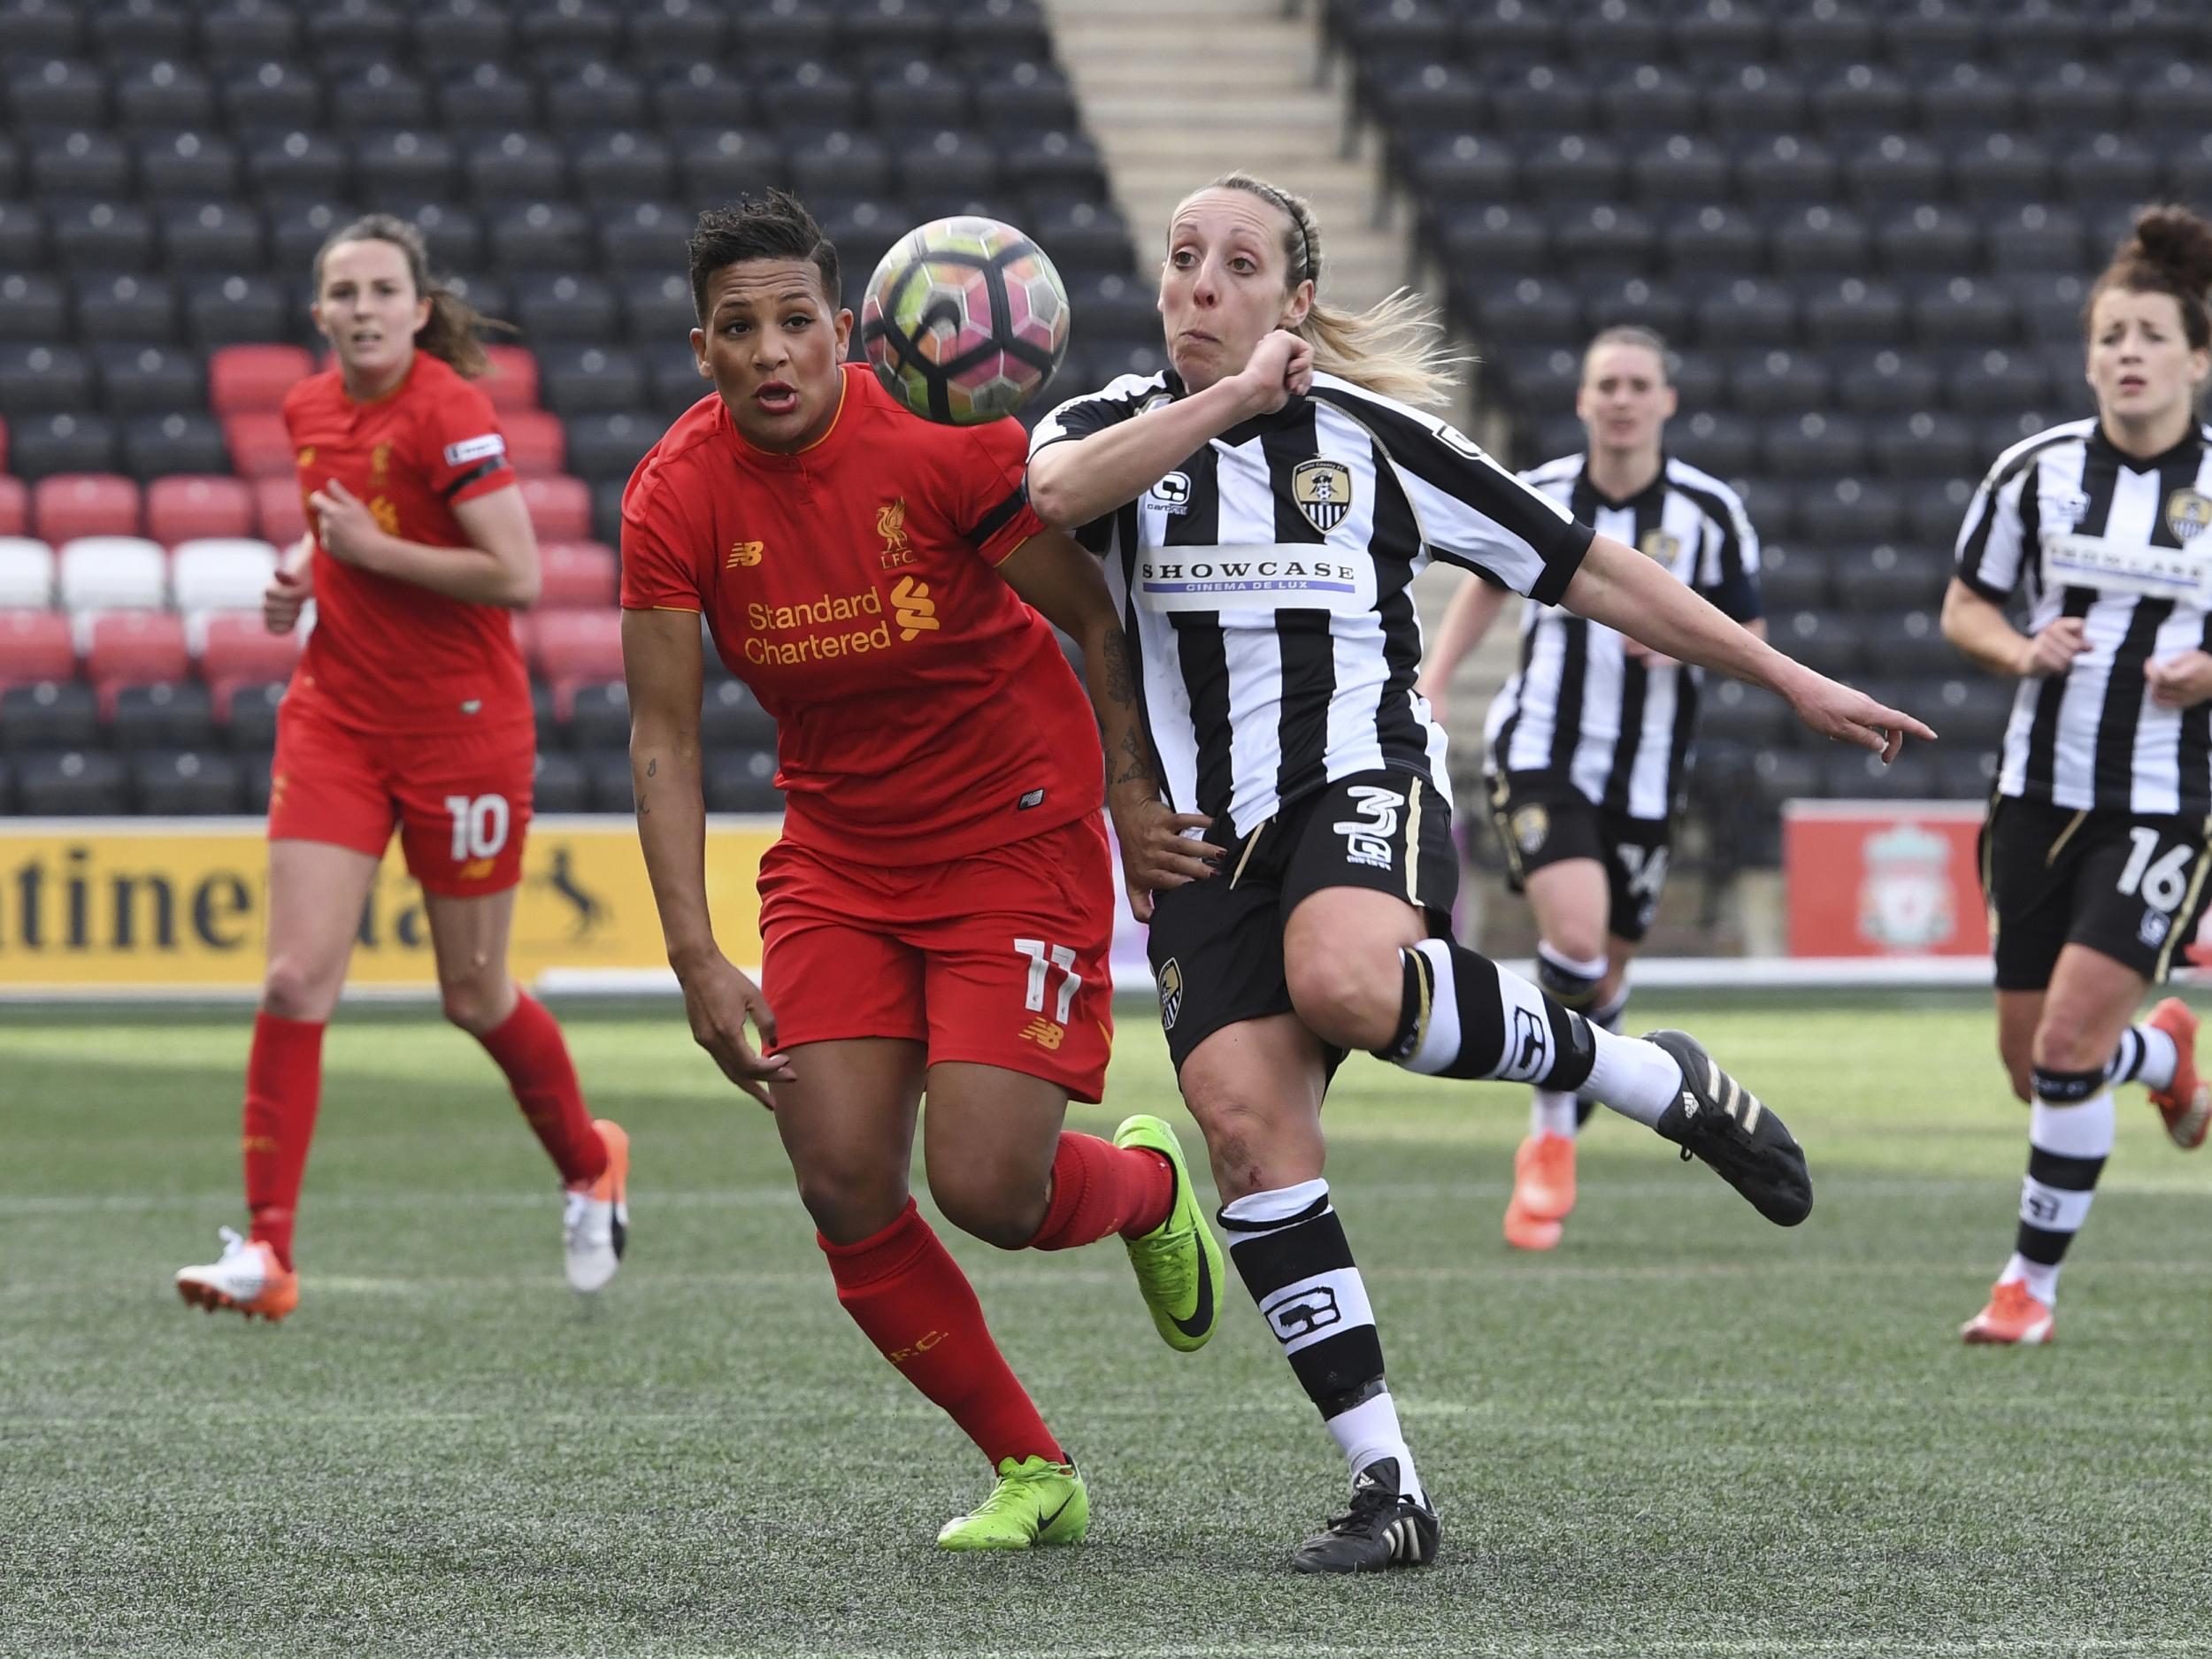 Notts County’s Ladies team have been withdrawn from the WSL